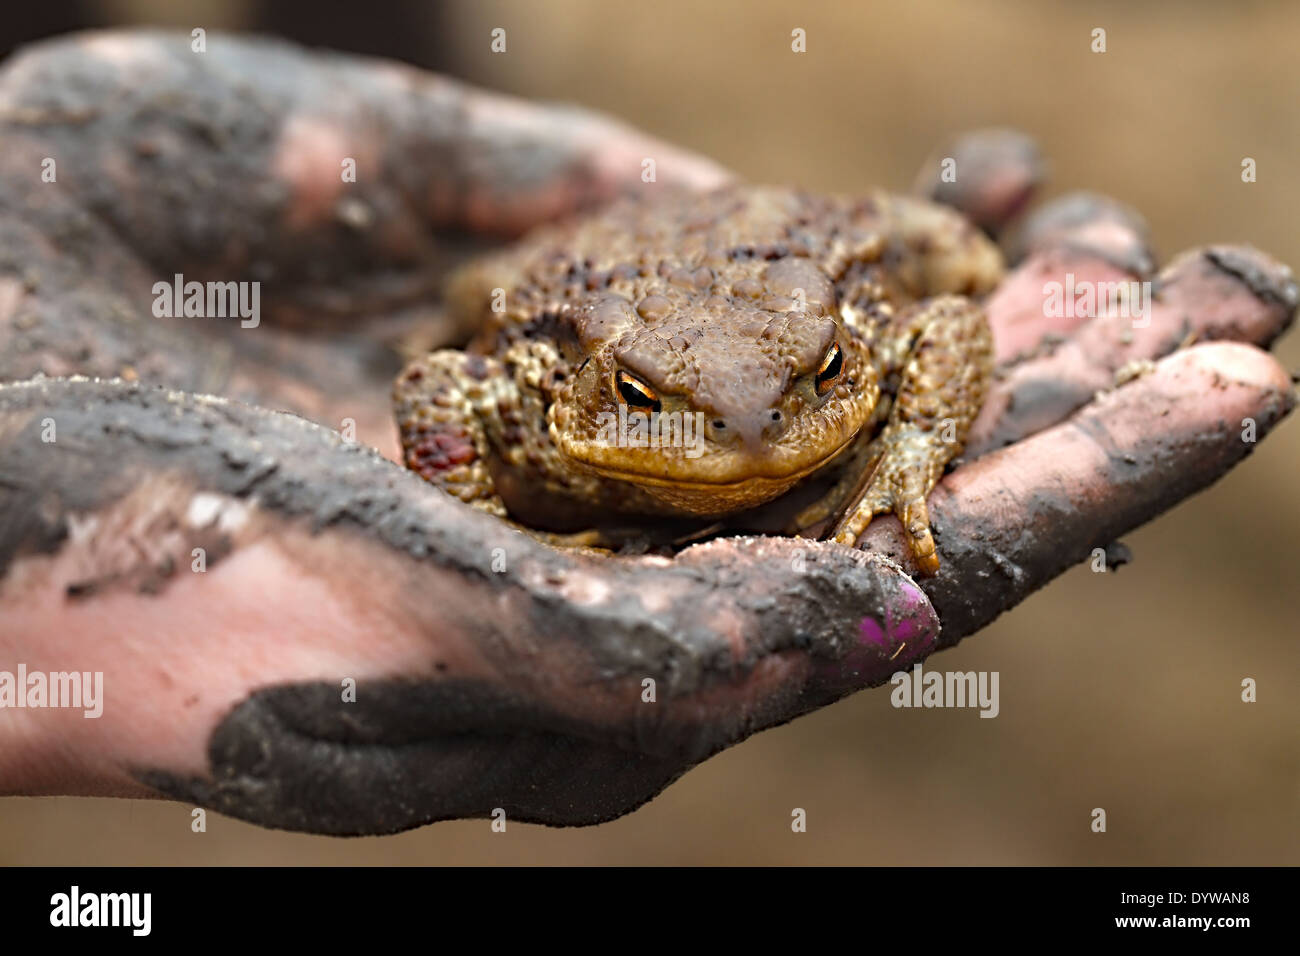 Toad in hand Stock Photo